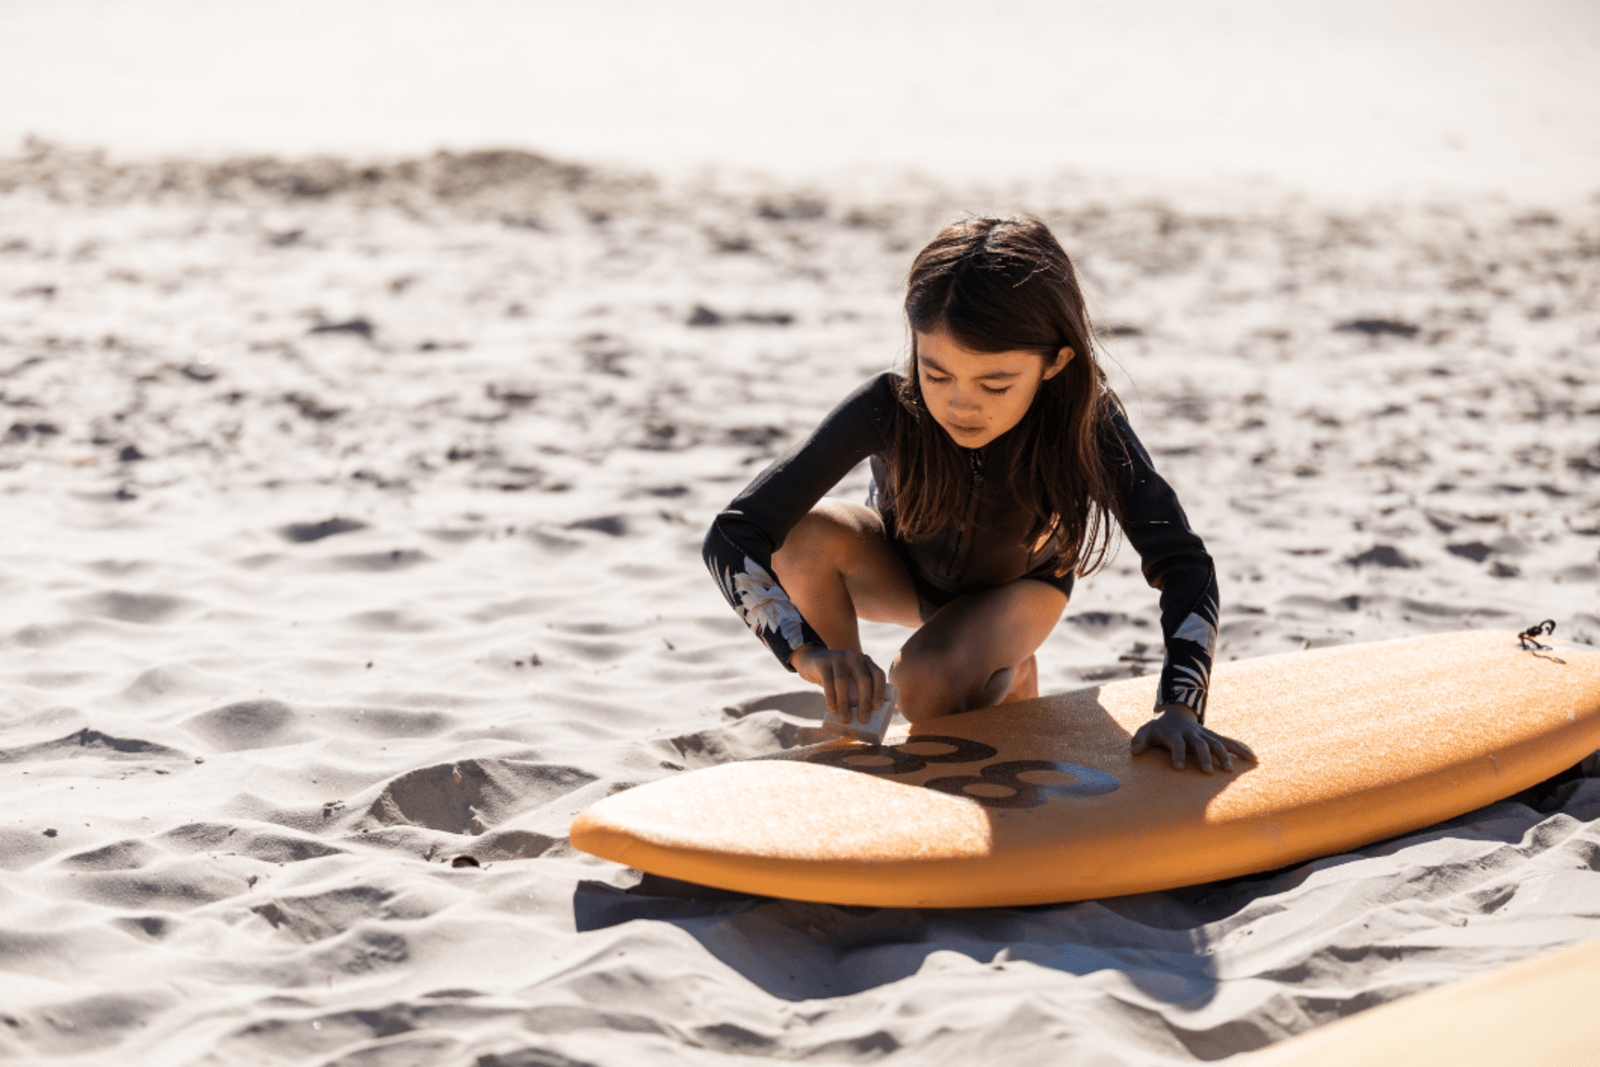 Young girl waxing her surfboard at Cocoa Beach, Florida